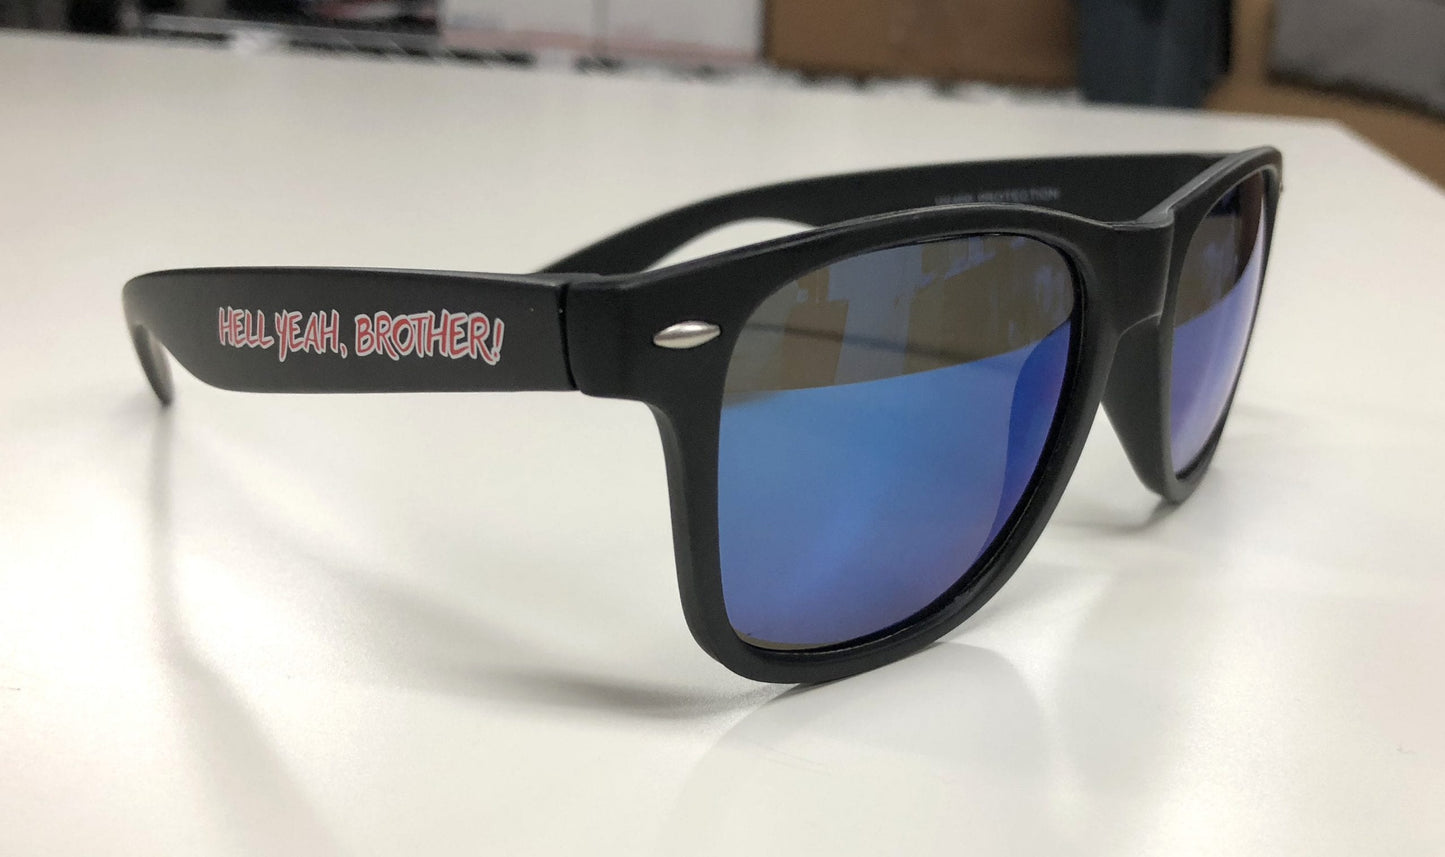 "Hell Yeah Brother" Bald Eagle Sunglasses